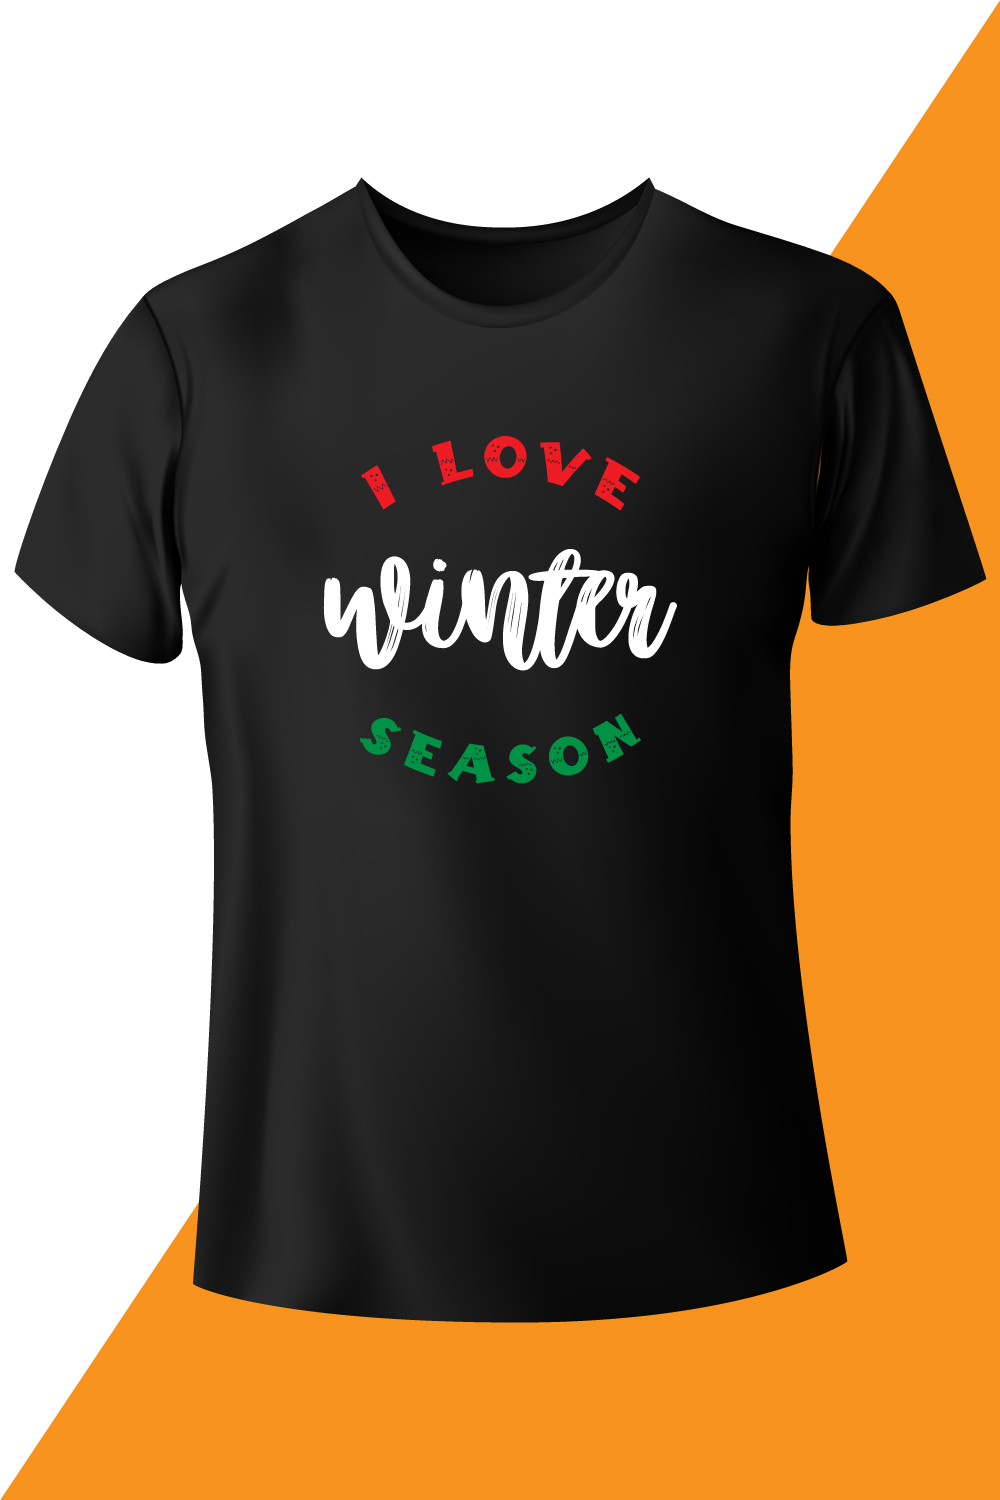 Image with a black t-shirt with a wonderful inscription i love winter season.